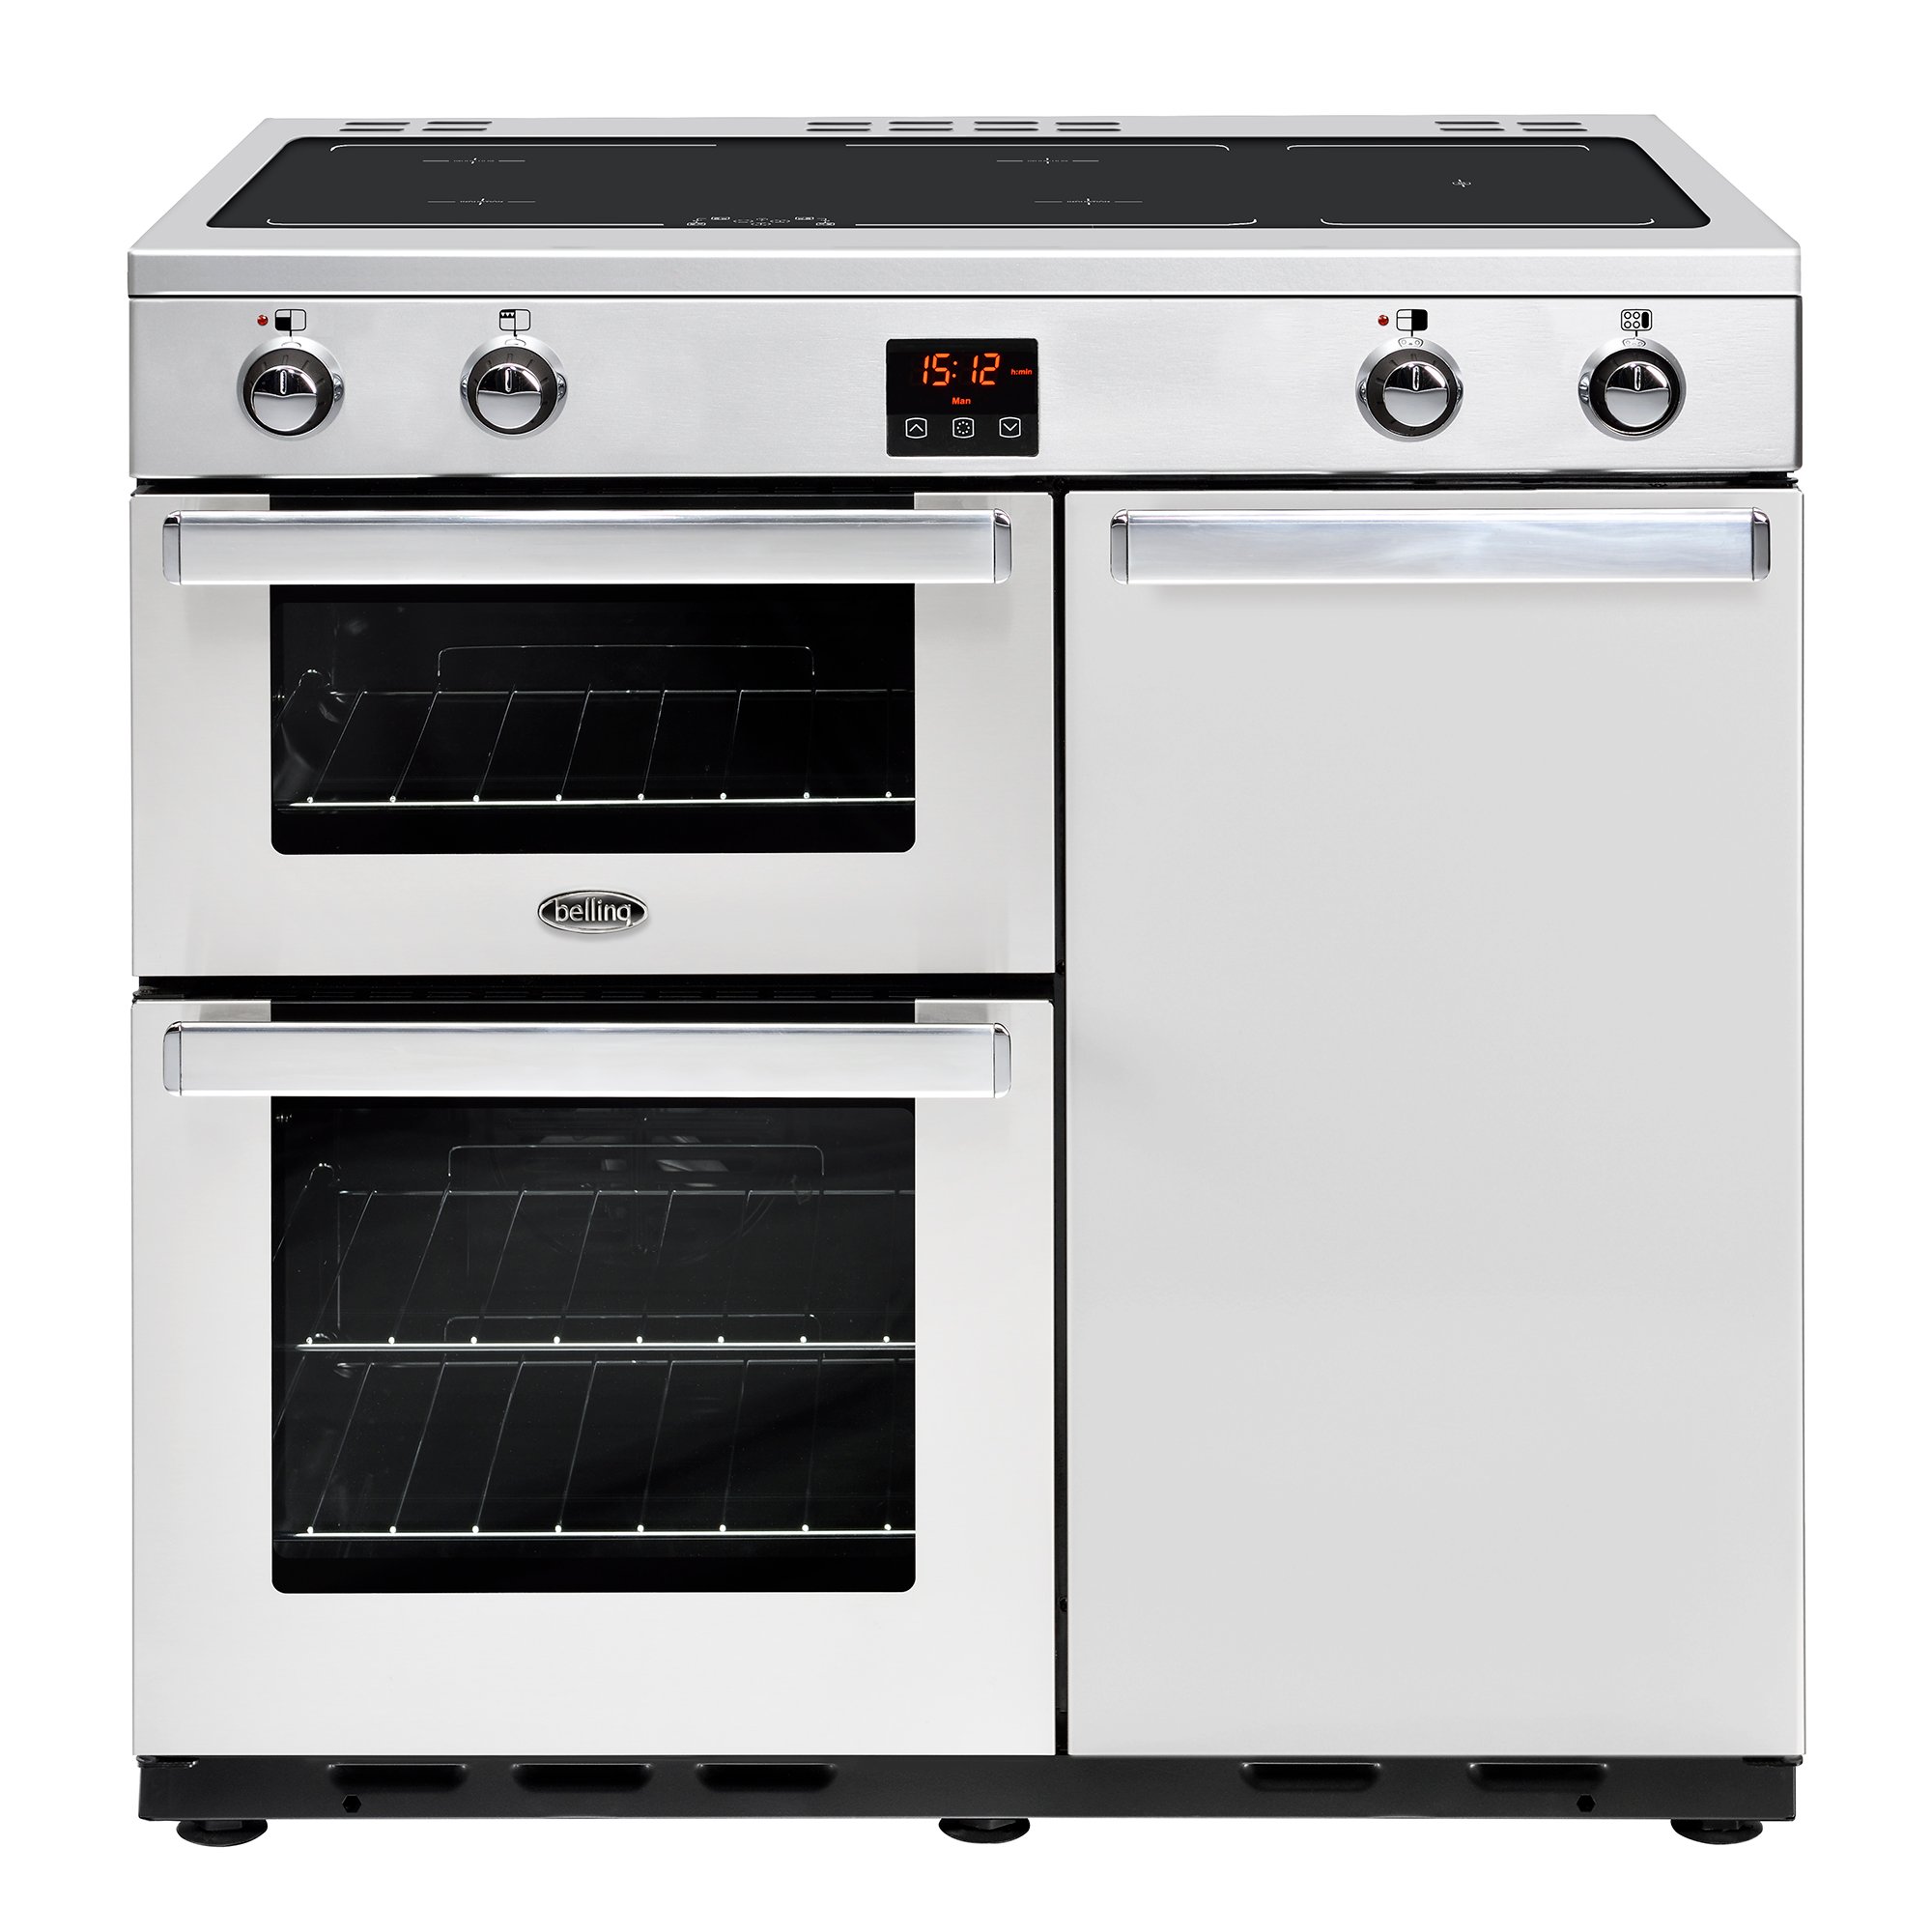 90cm electric range cooker with 4 zone induction hob and additional warming zone, conventional oven & grill, main fanned electric oven and tall fanned electric oven. Requires 32A connection.